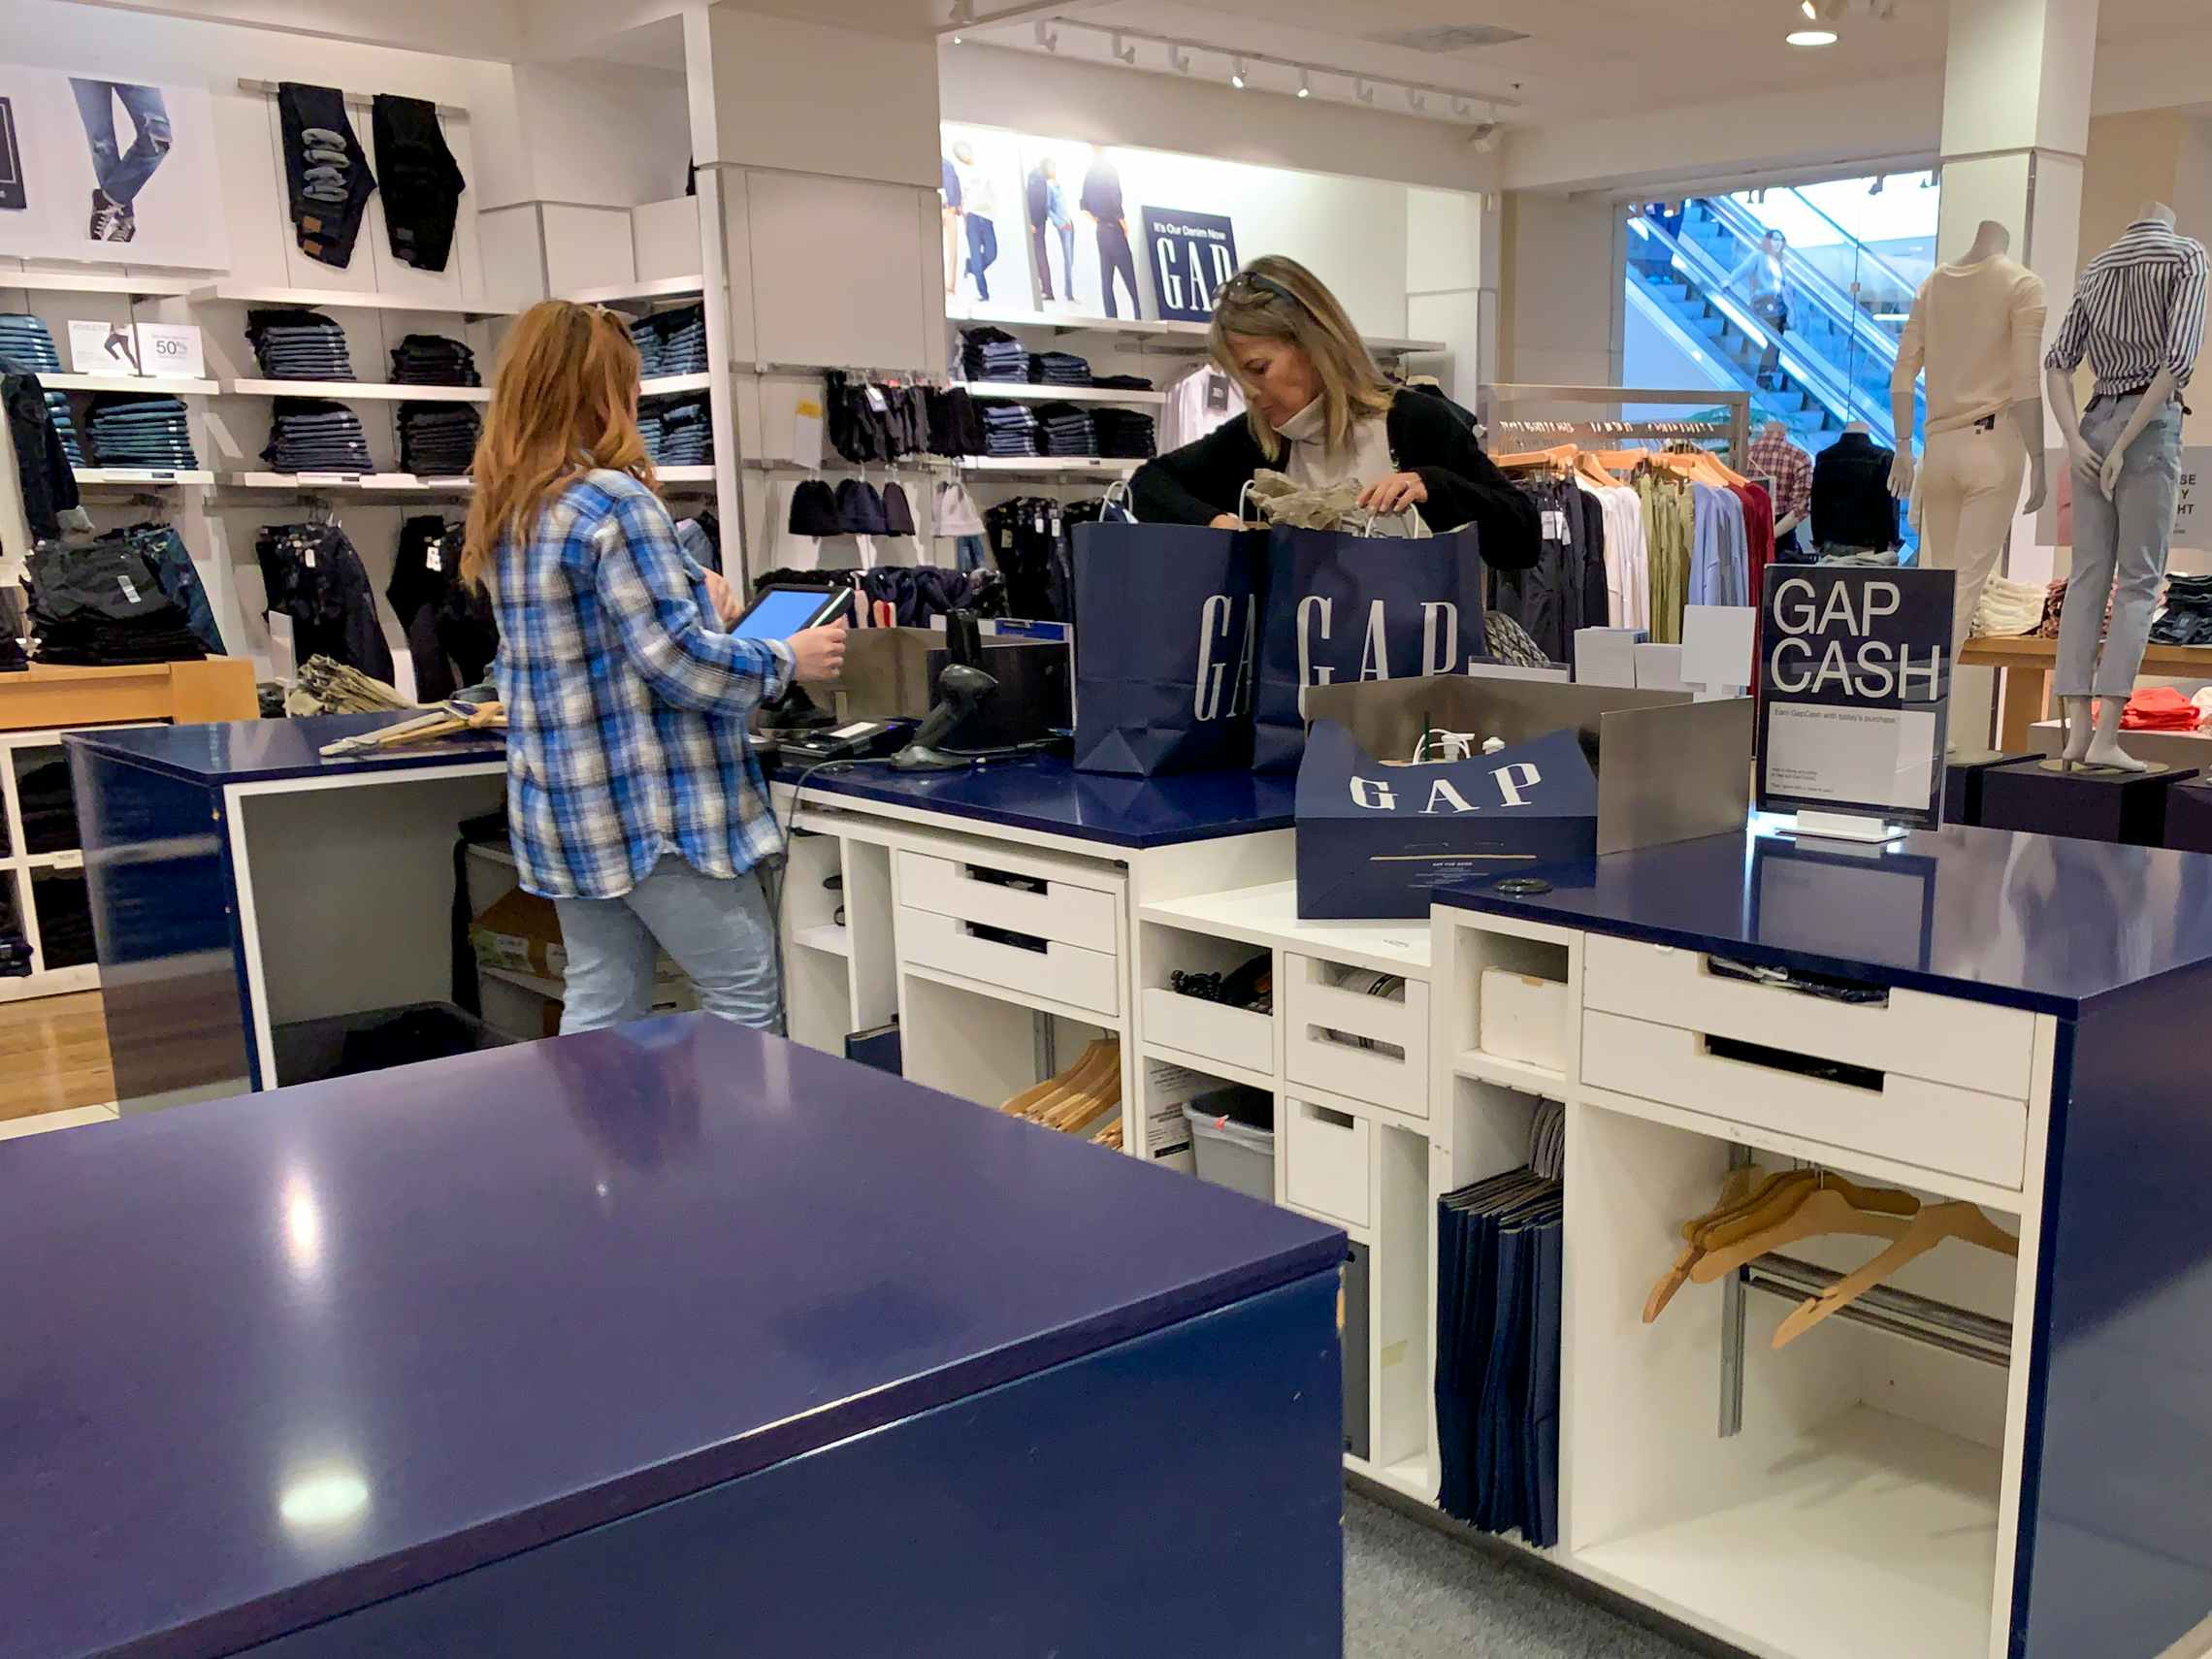 Gap employee checking out a woman at a Gap counter.